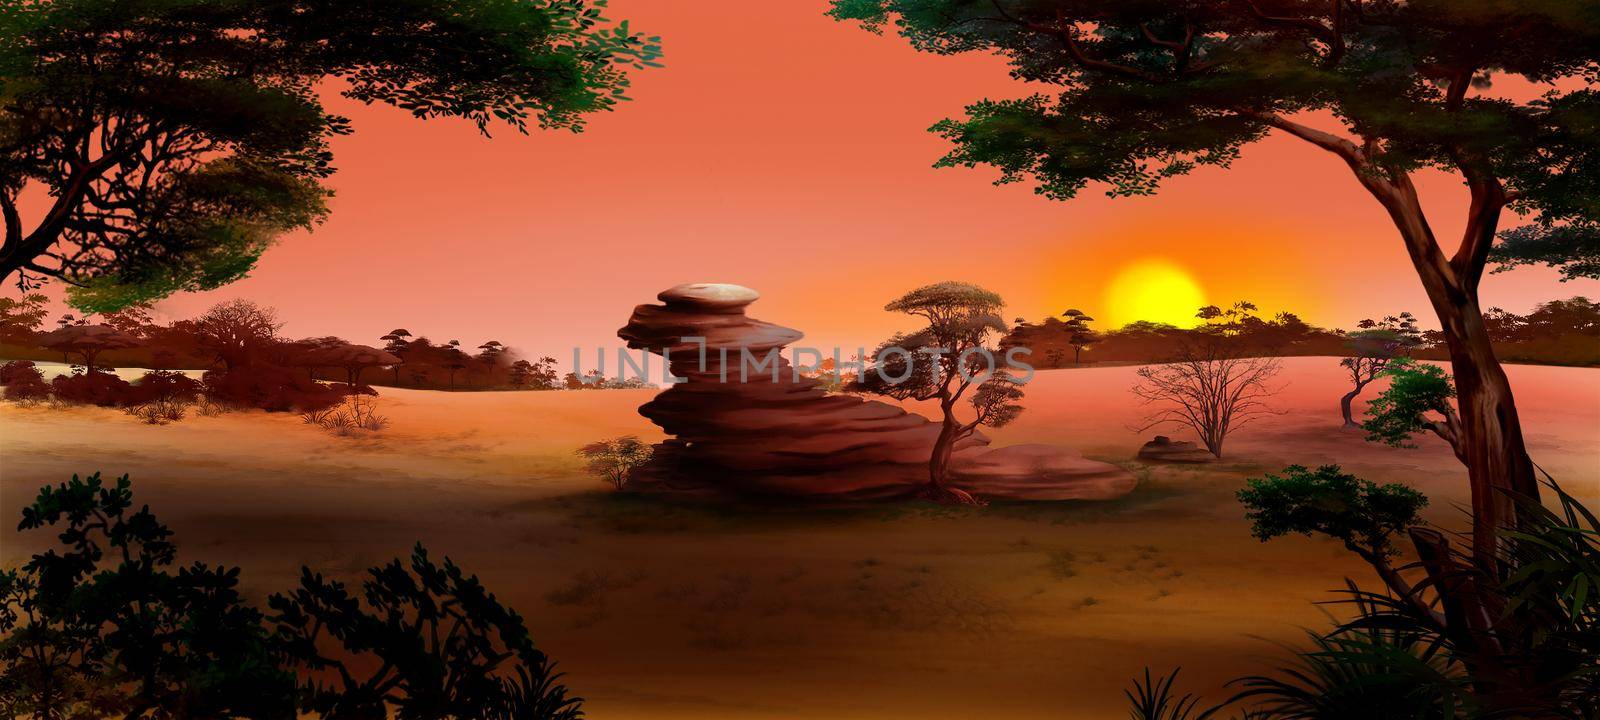 Lone rock in african landscape at sunset. Digital Painting Background, Illustration.